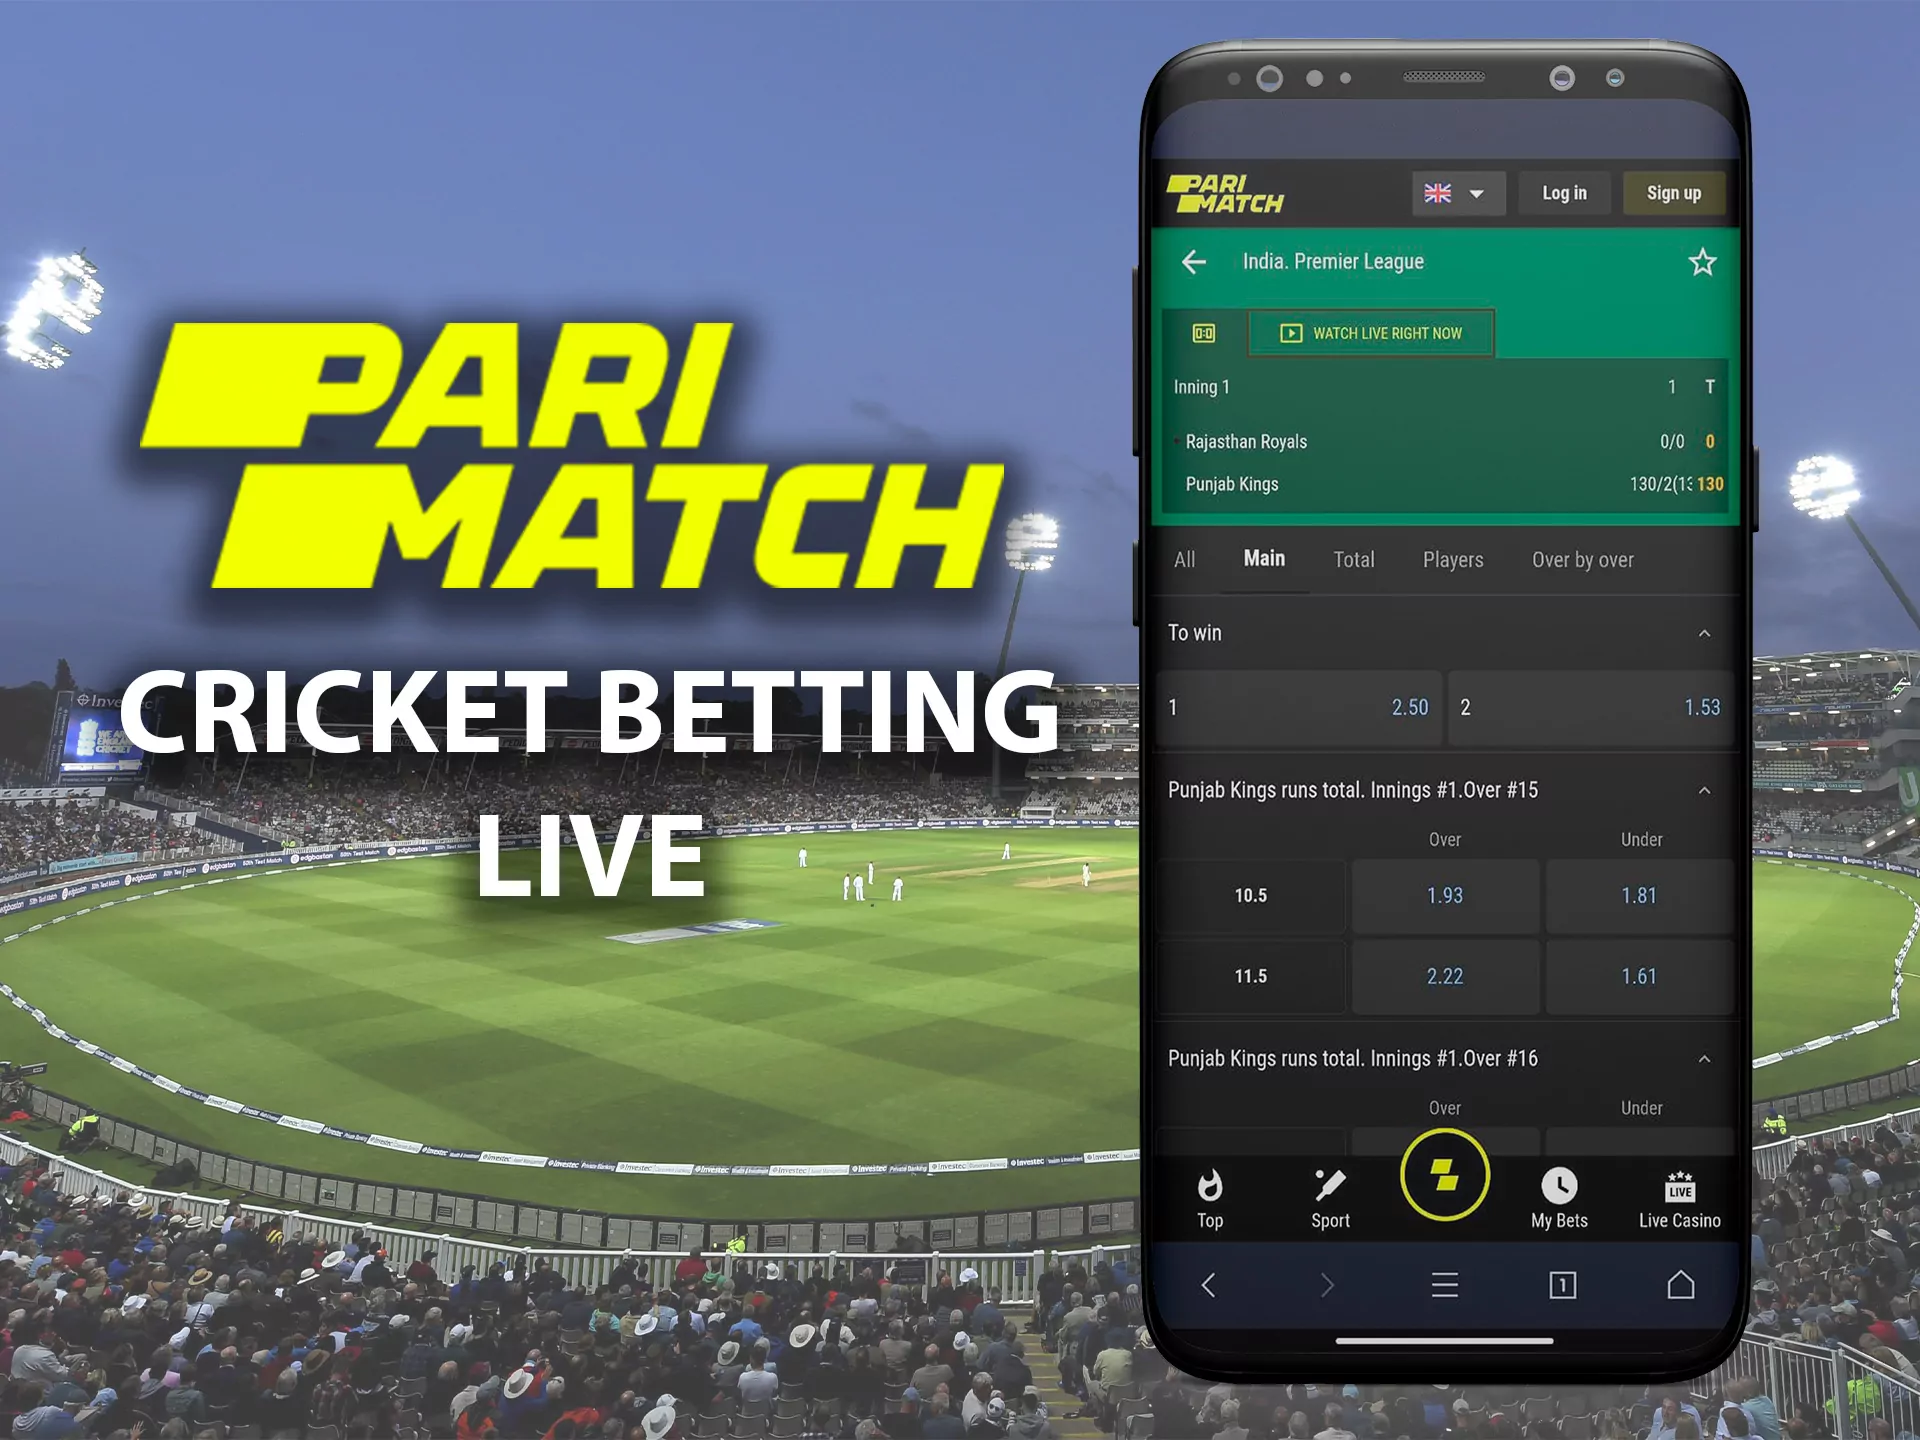 Parimatch allows you to place bets right during the match